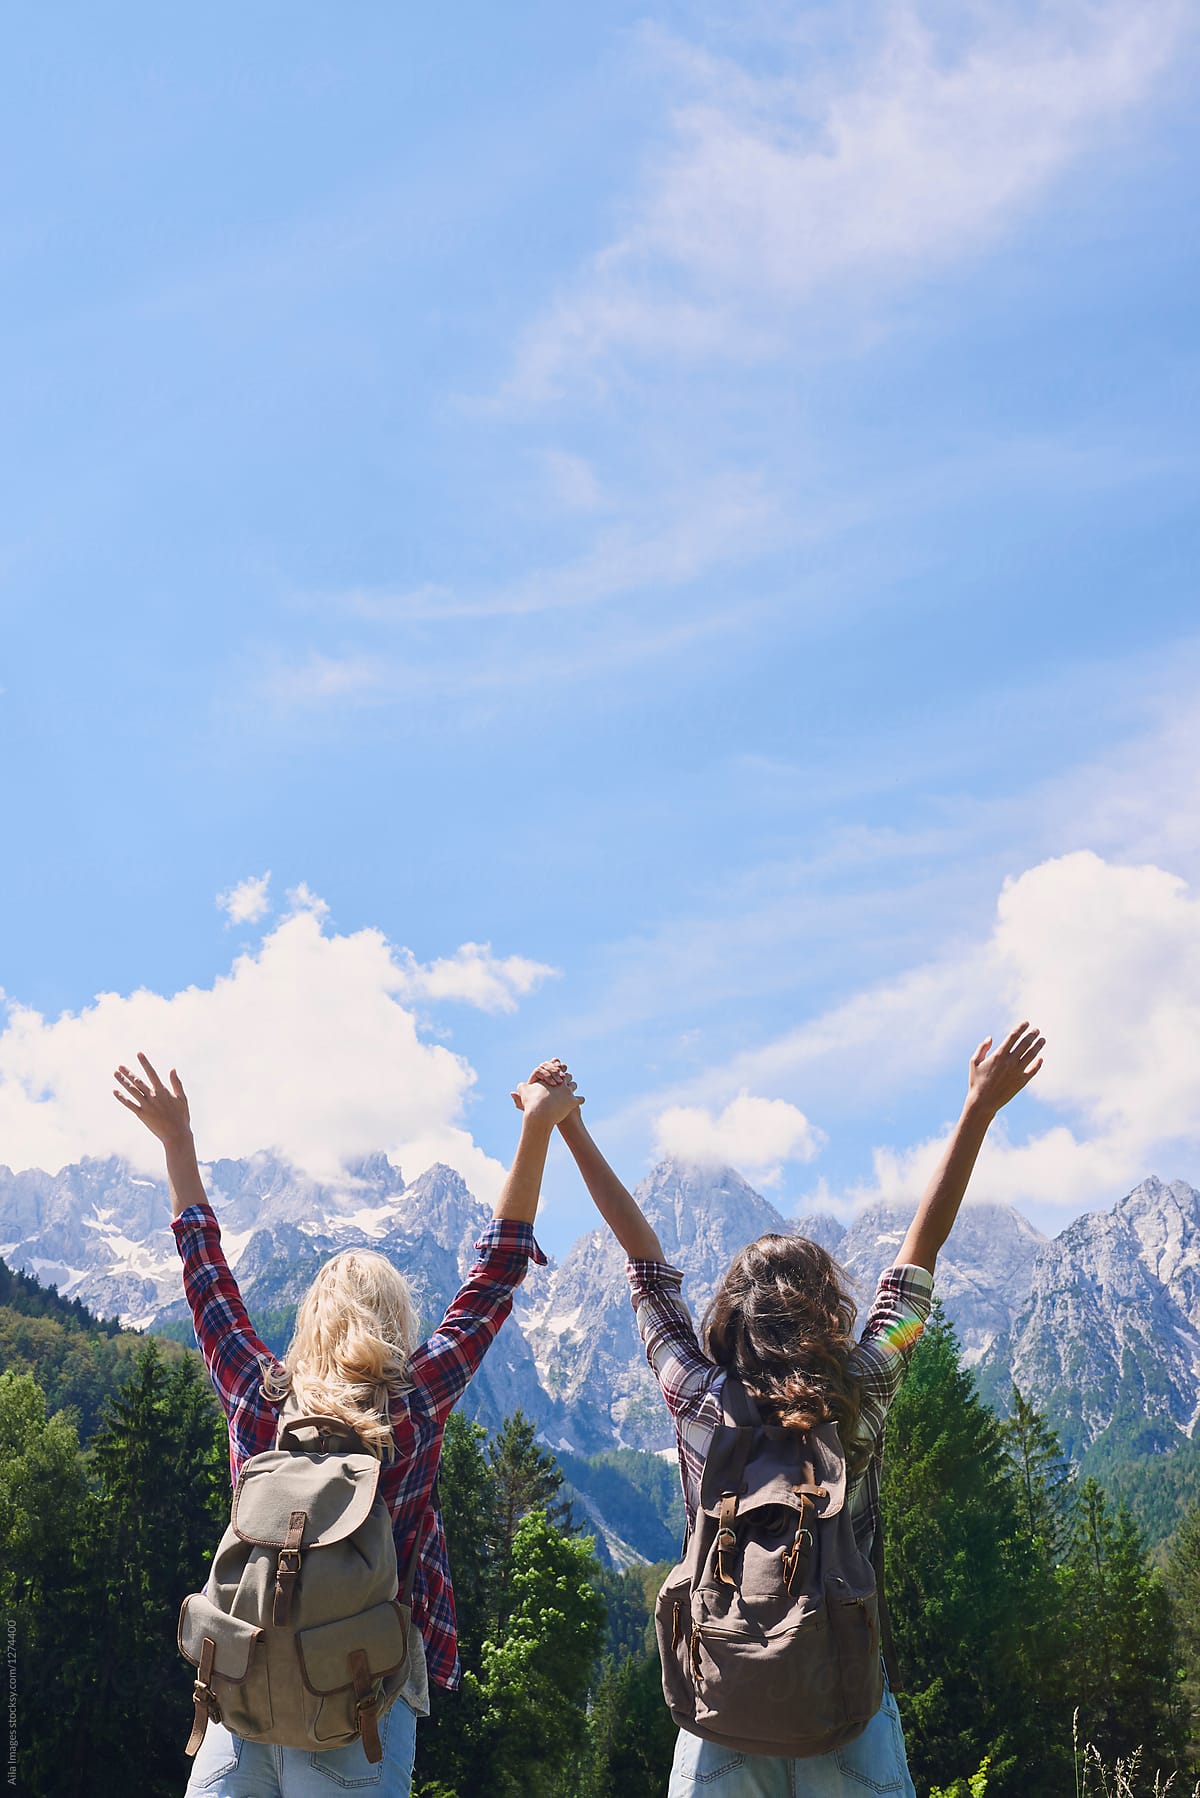 Travel girl friends celebrate adventure with arms outstretched